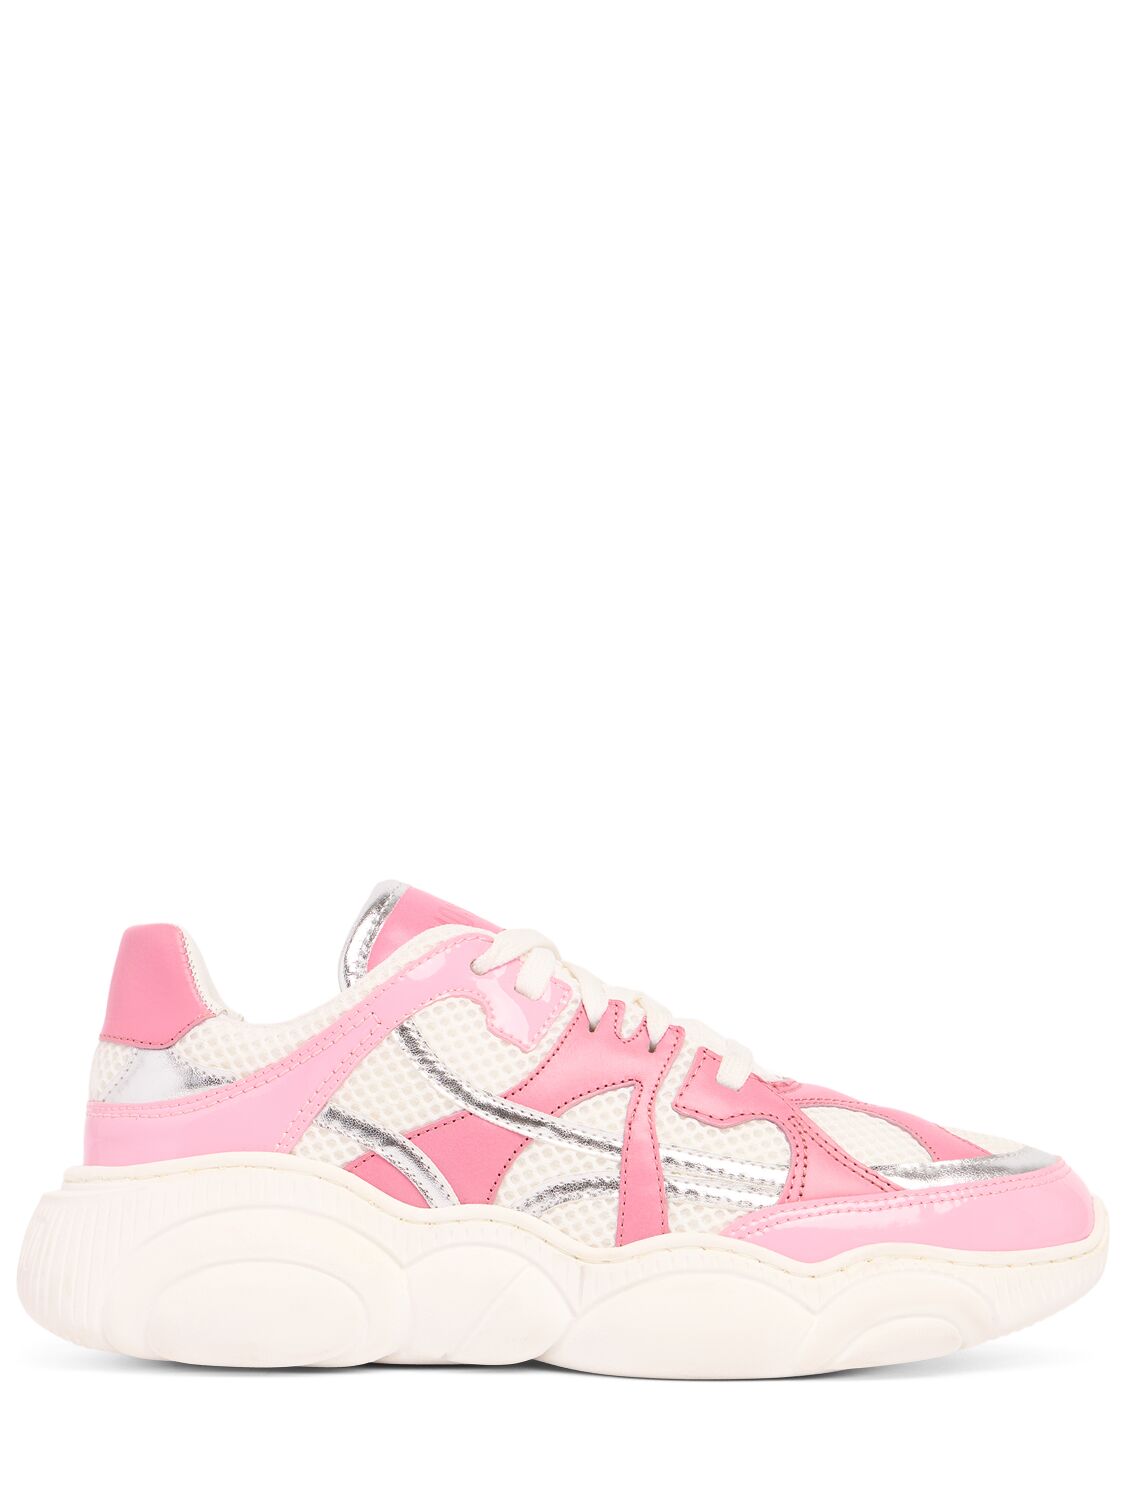 Moschino Faux Leather Sneakers In Pink/white